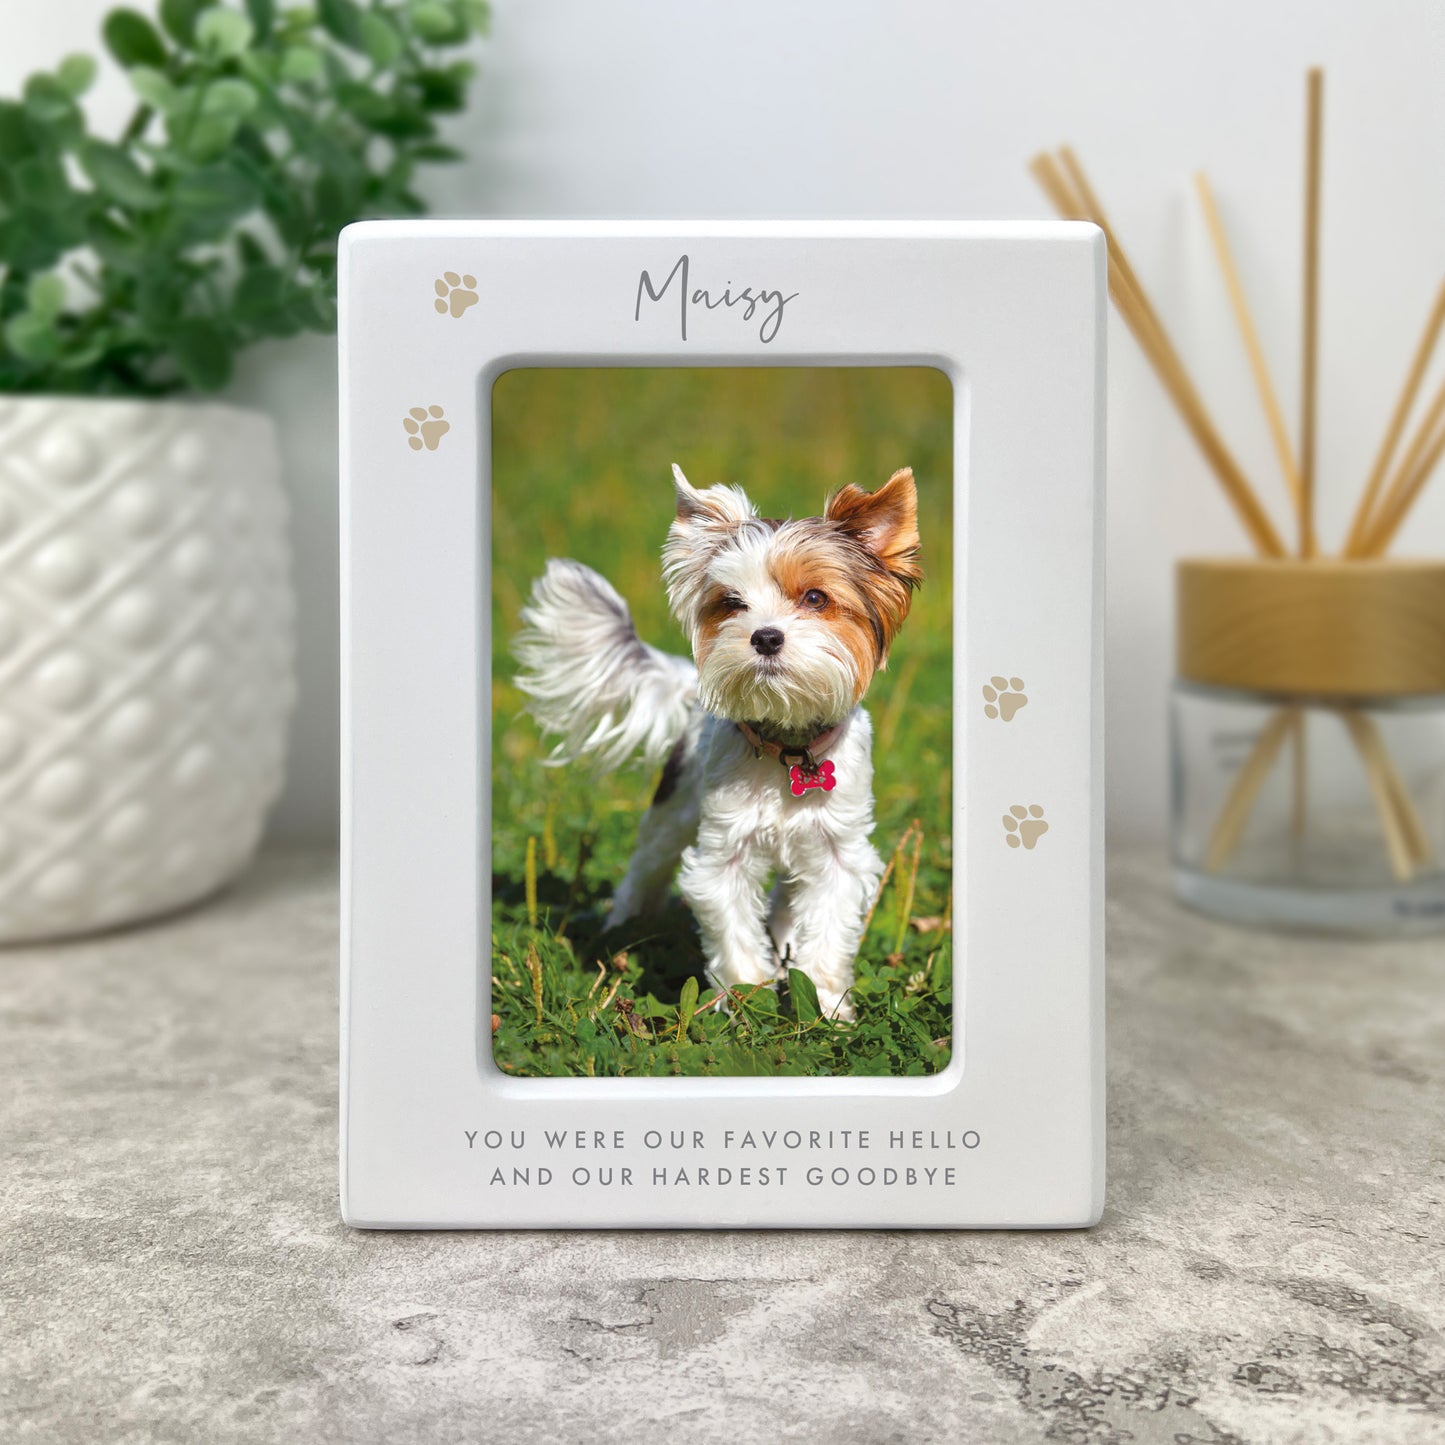 Personalised Neutral Paw Prints Cremation Urn For Pets Ashes Holds 9.5cm x 6cm Photo Landscape | 0.51 Litres